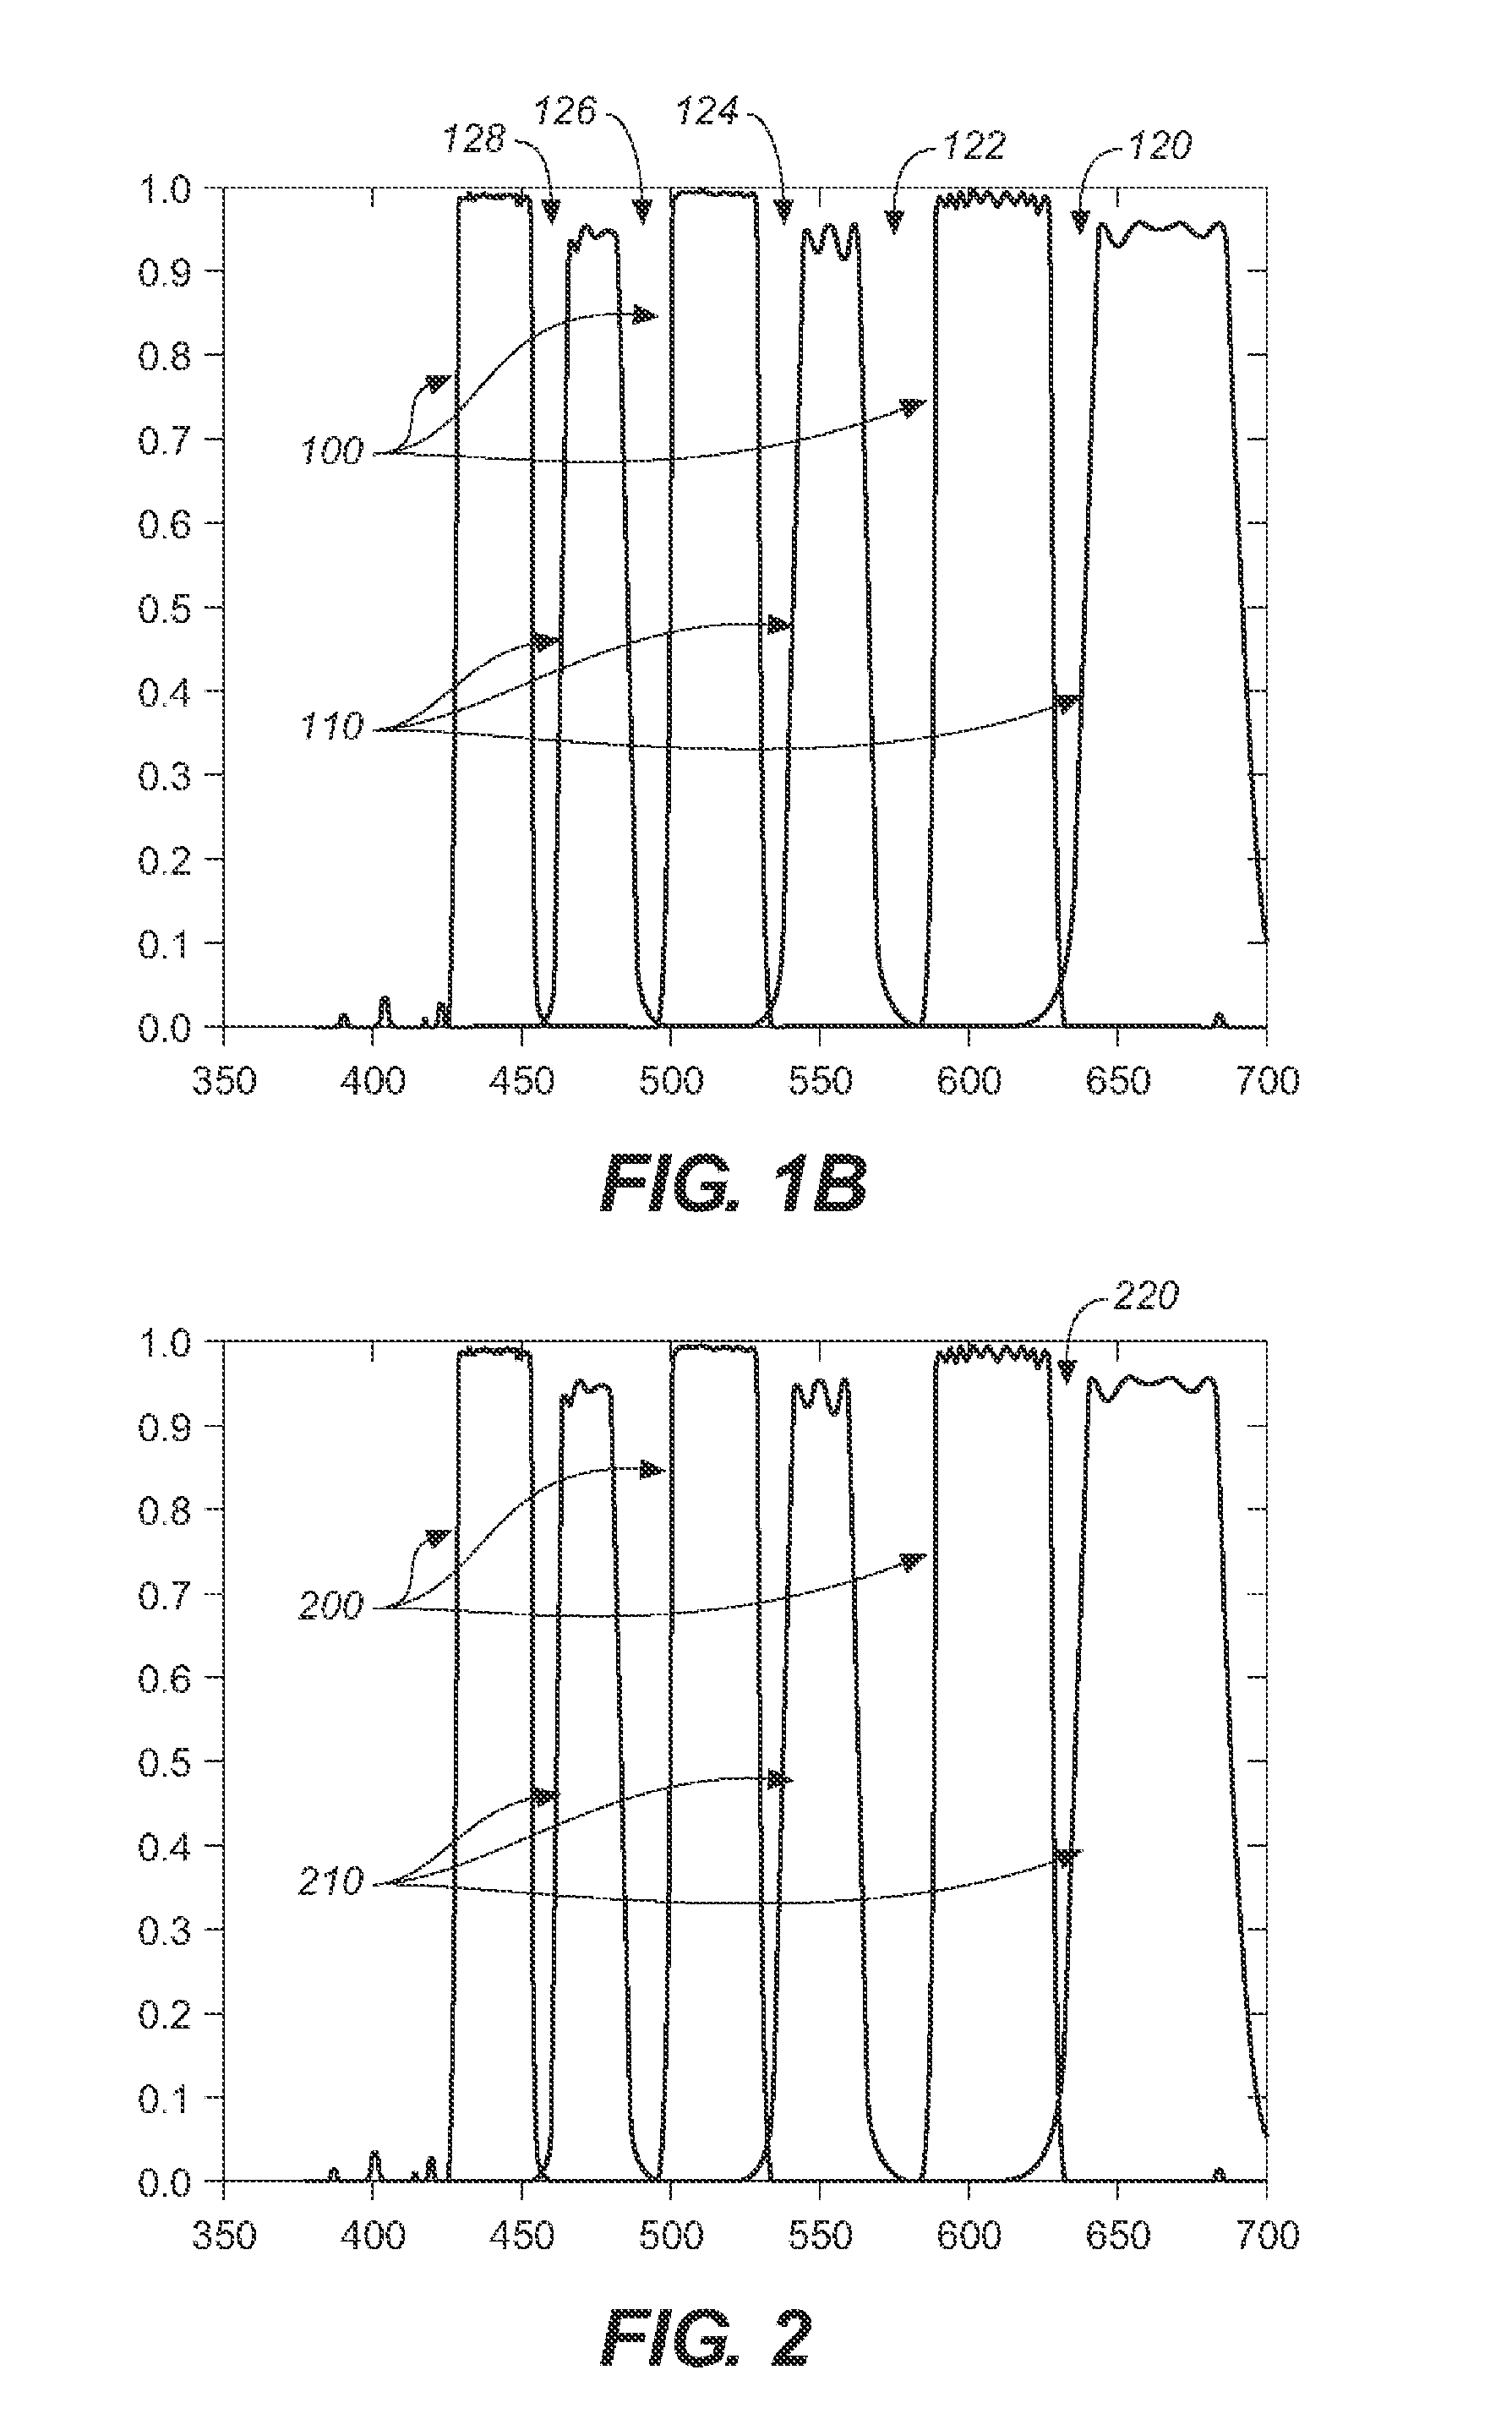 Method and system for shaped glasses and viewing 3D images